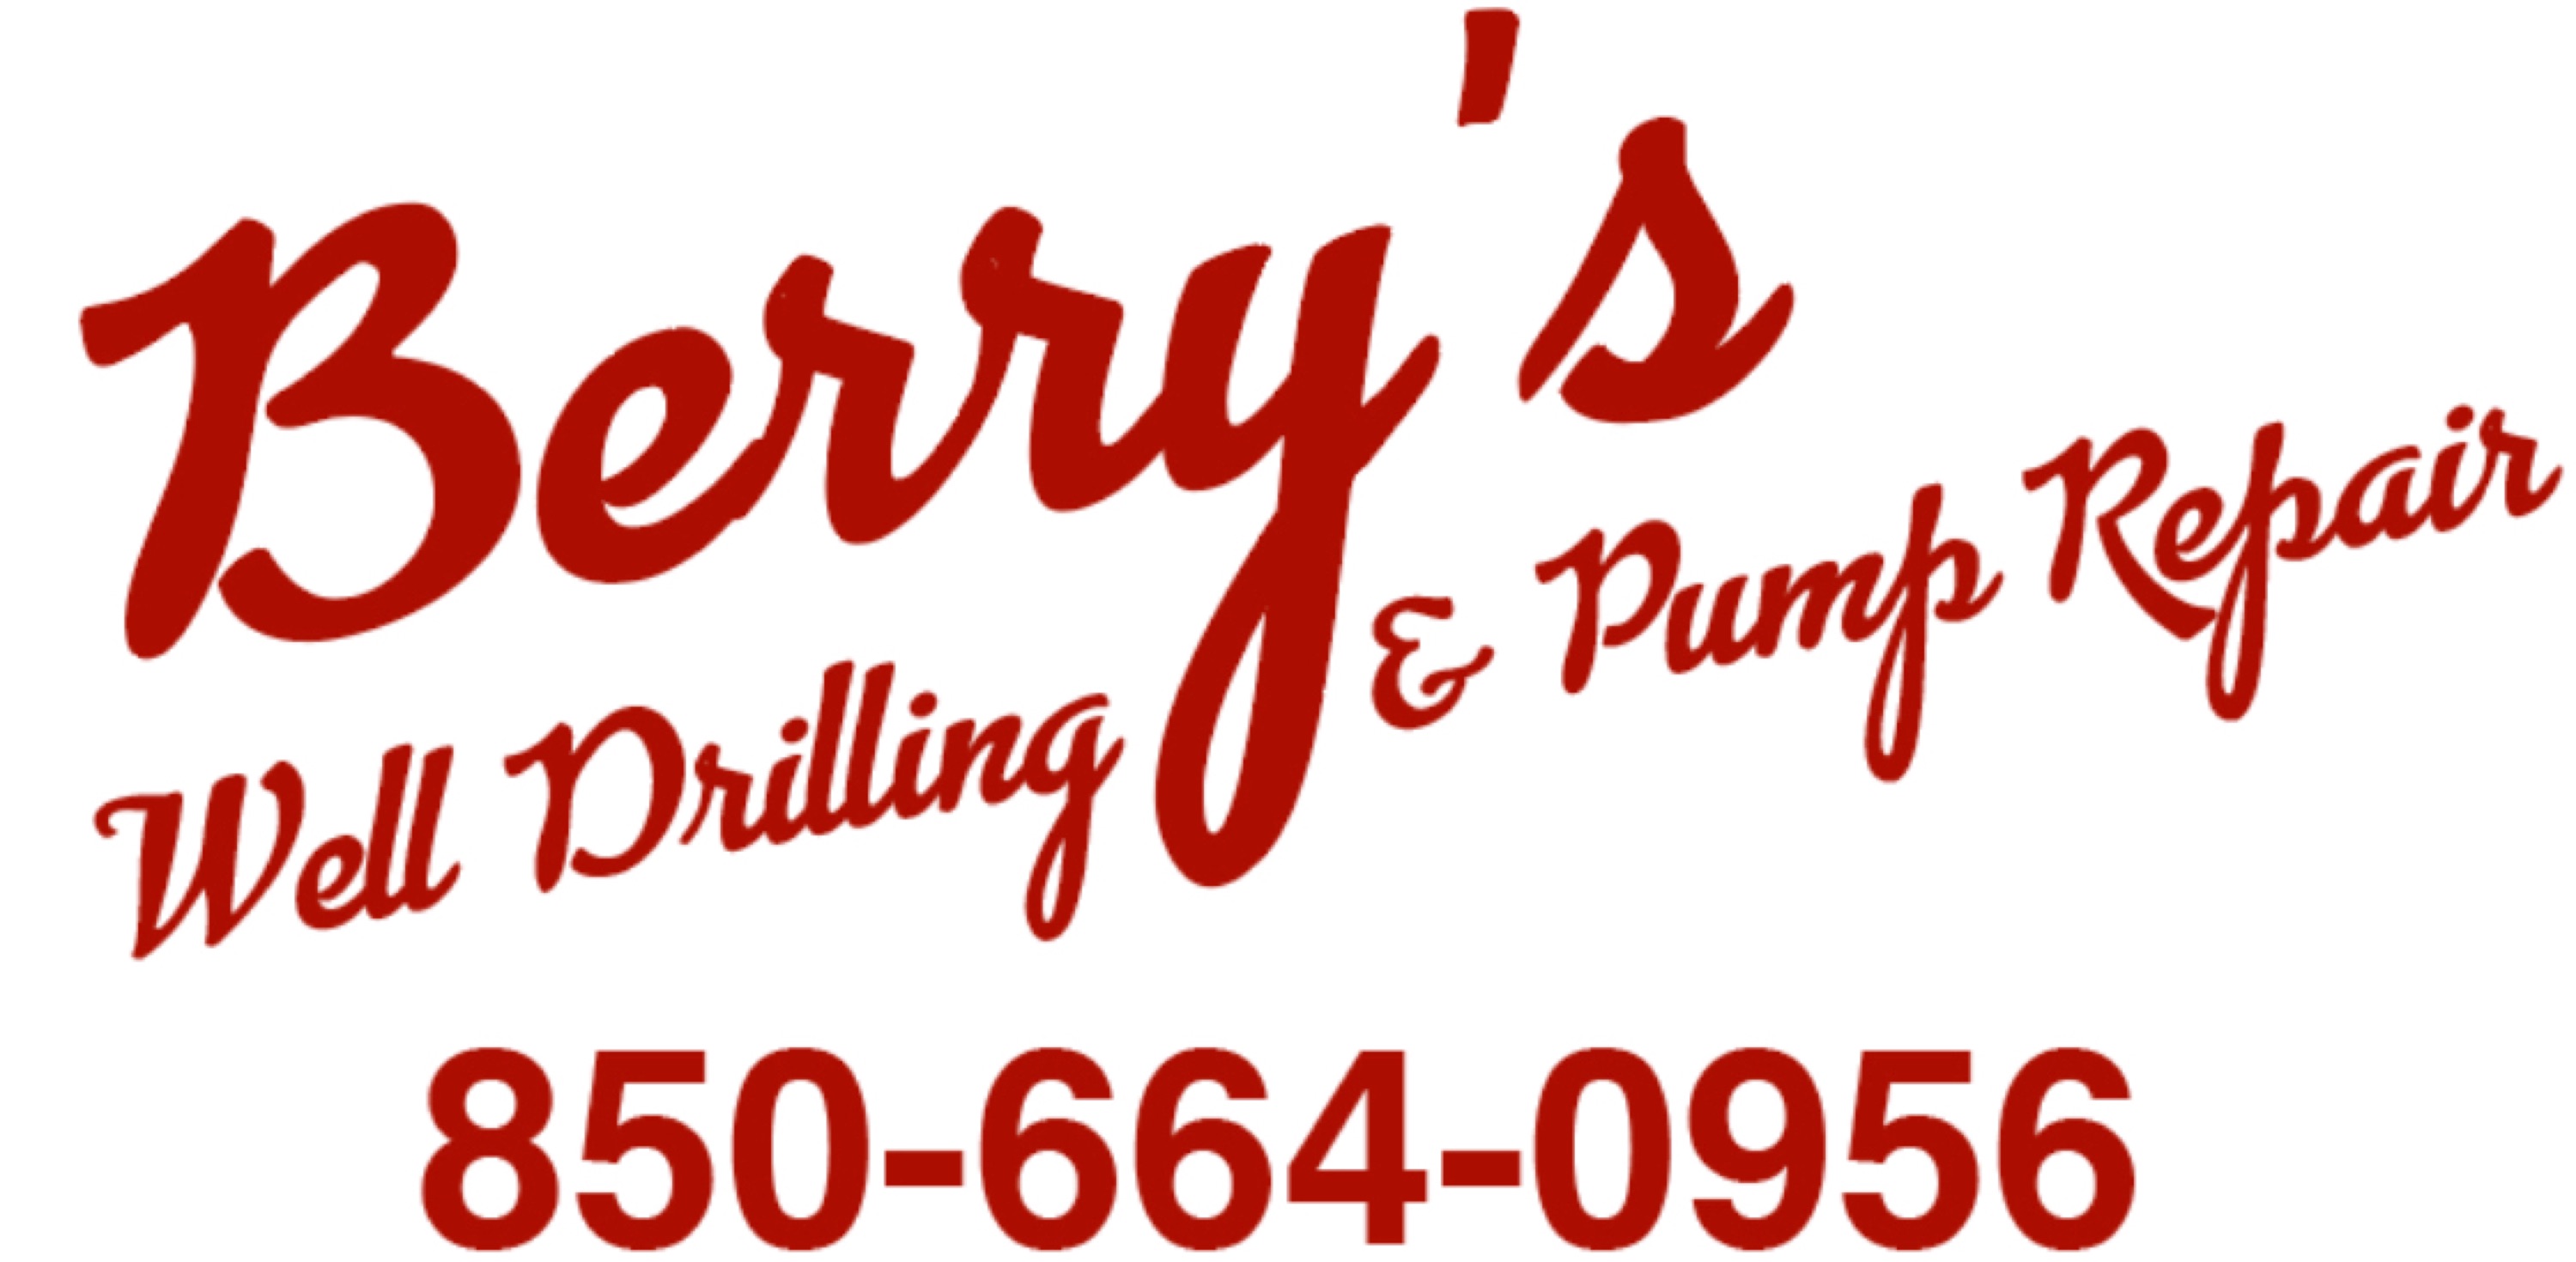 Berry's Well Drilling, Inc. Logo